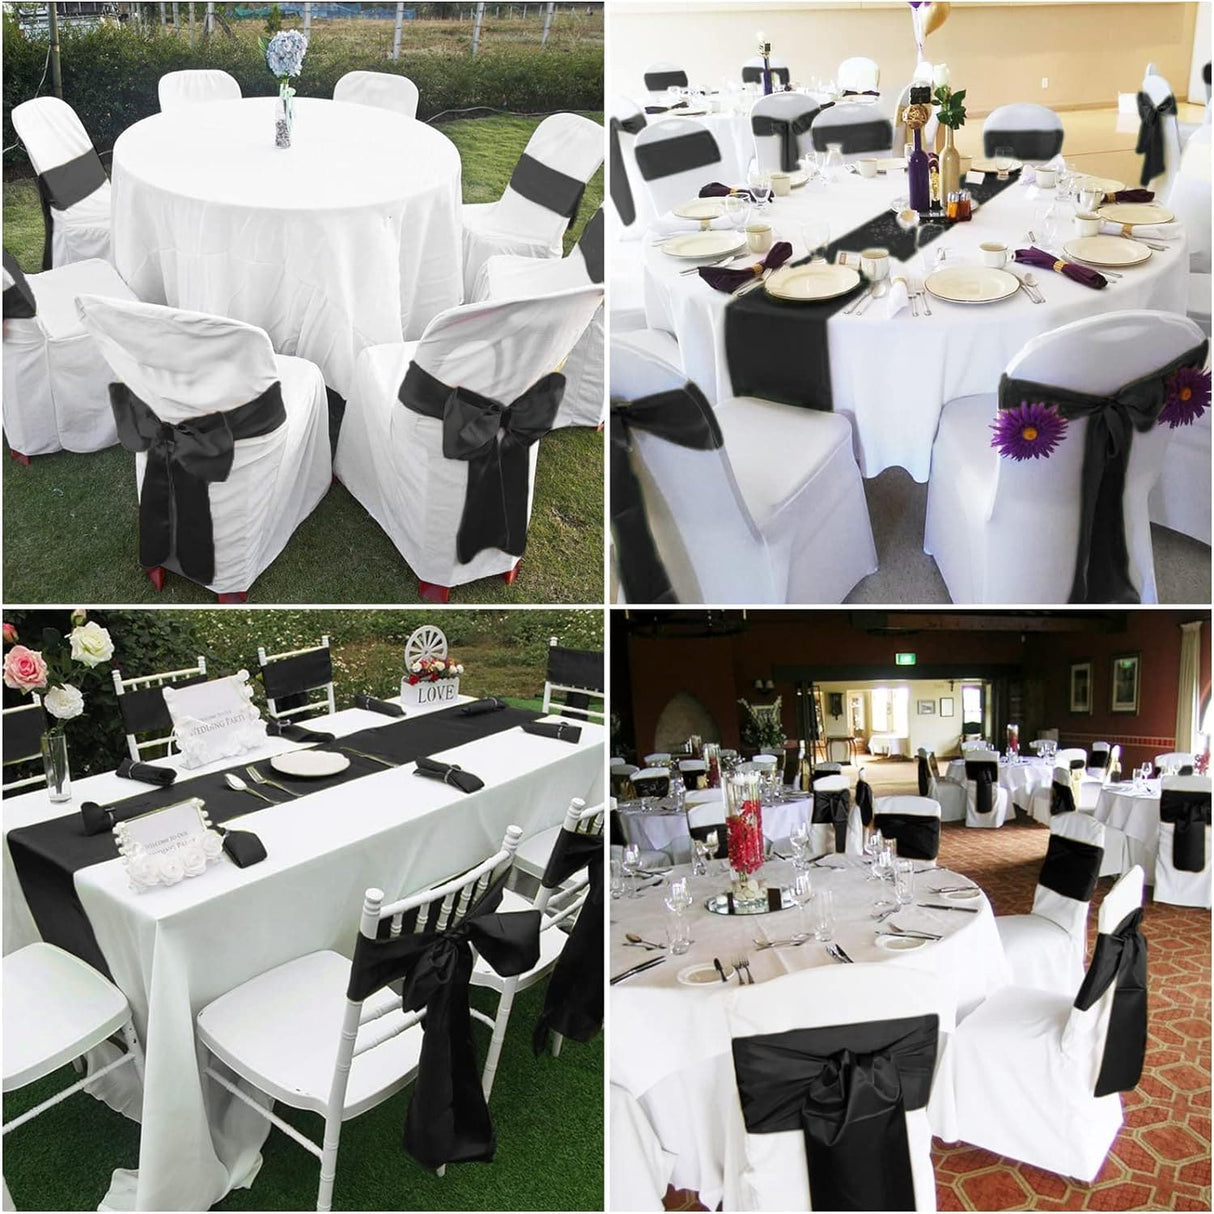 50 PCS Satin Chair Sash Chair Decorative Bow Designed Chair Cover Chair Sashes for Thanksgiving Wedding Christmas Banquet Party Home Kitchen Decoration